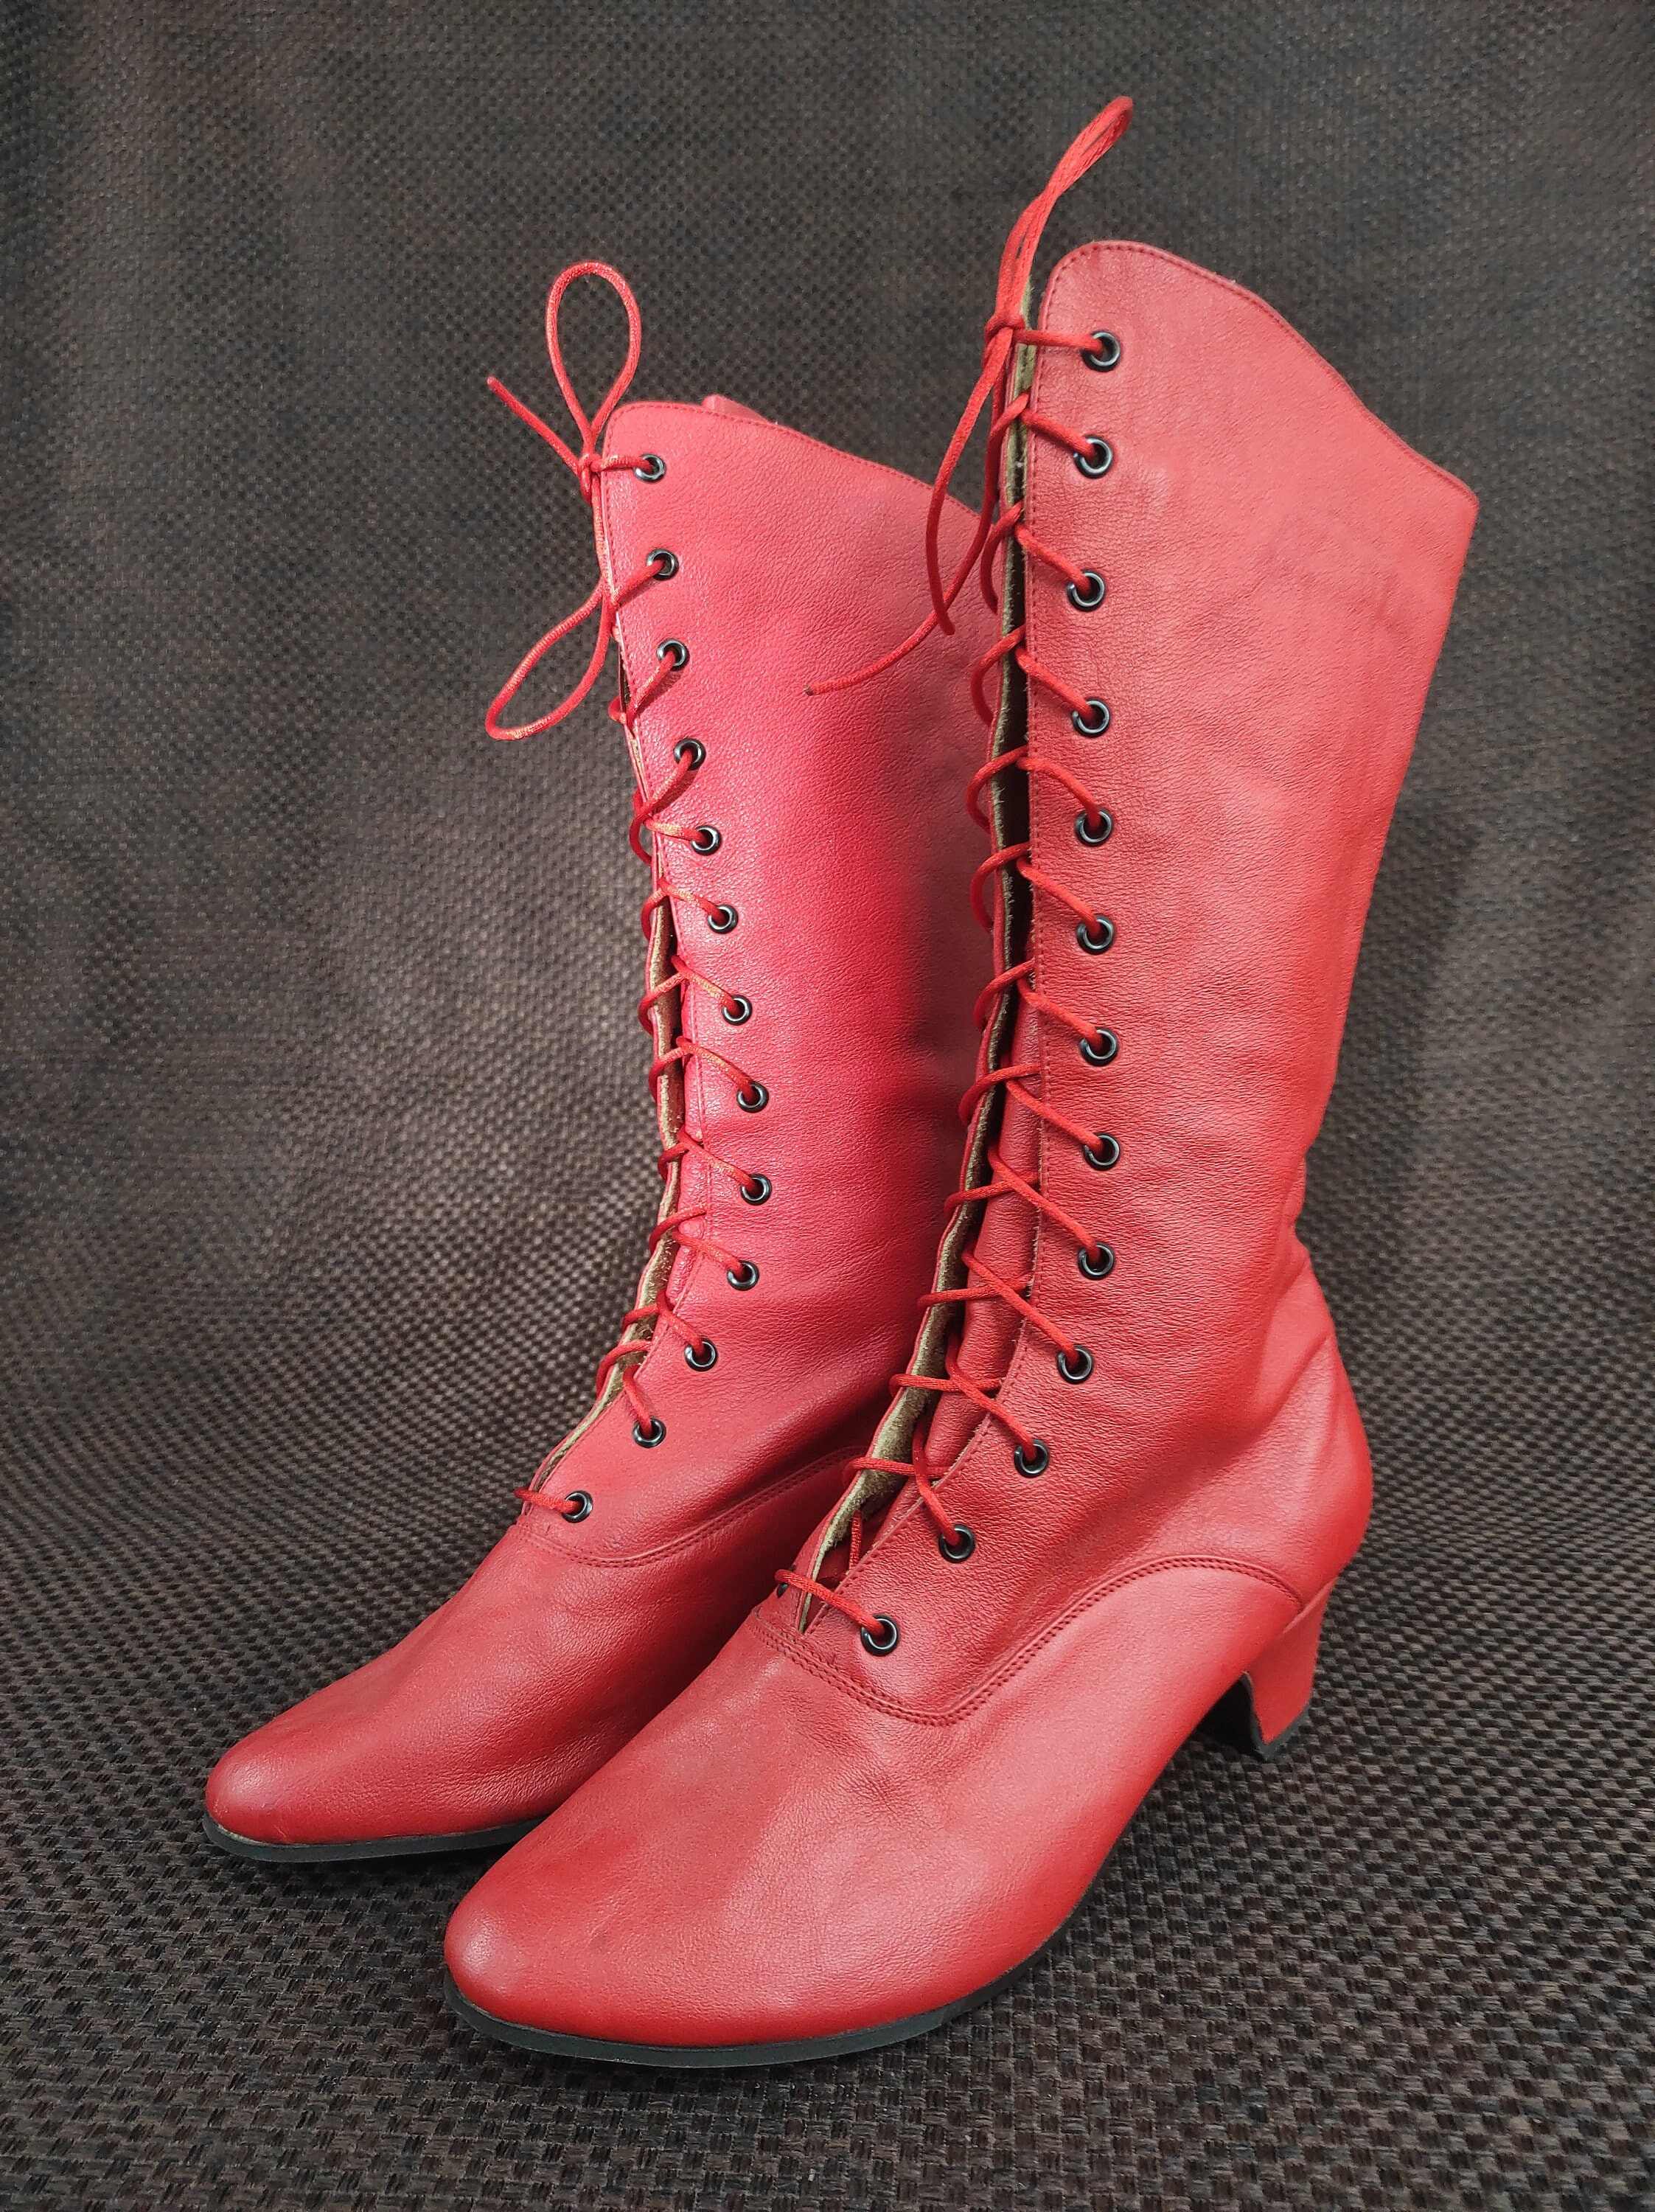 1930's Tall Lace Up Hiking Boots Womens sz 6 - Hippie Tall Lace Up - Ruby  Lane